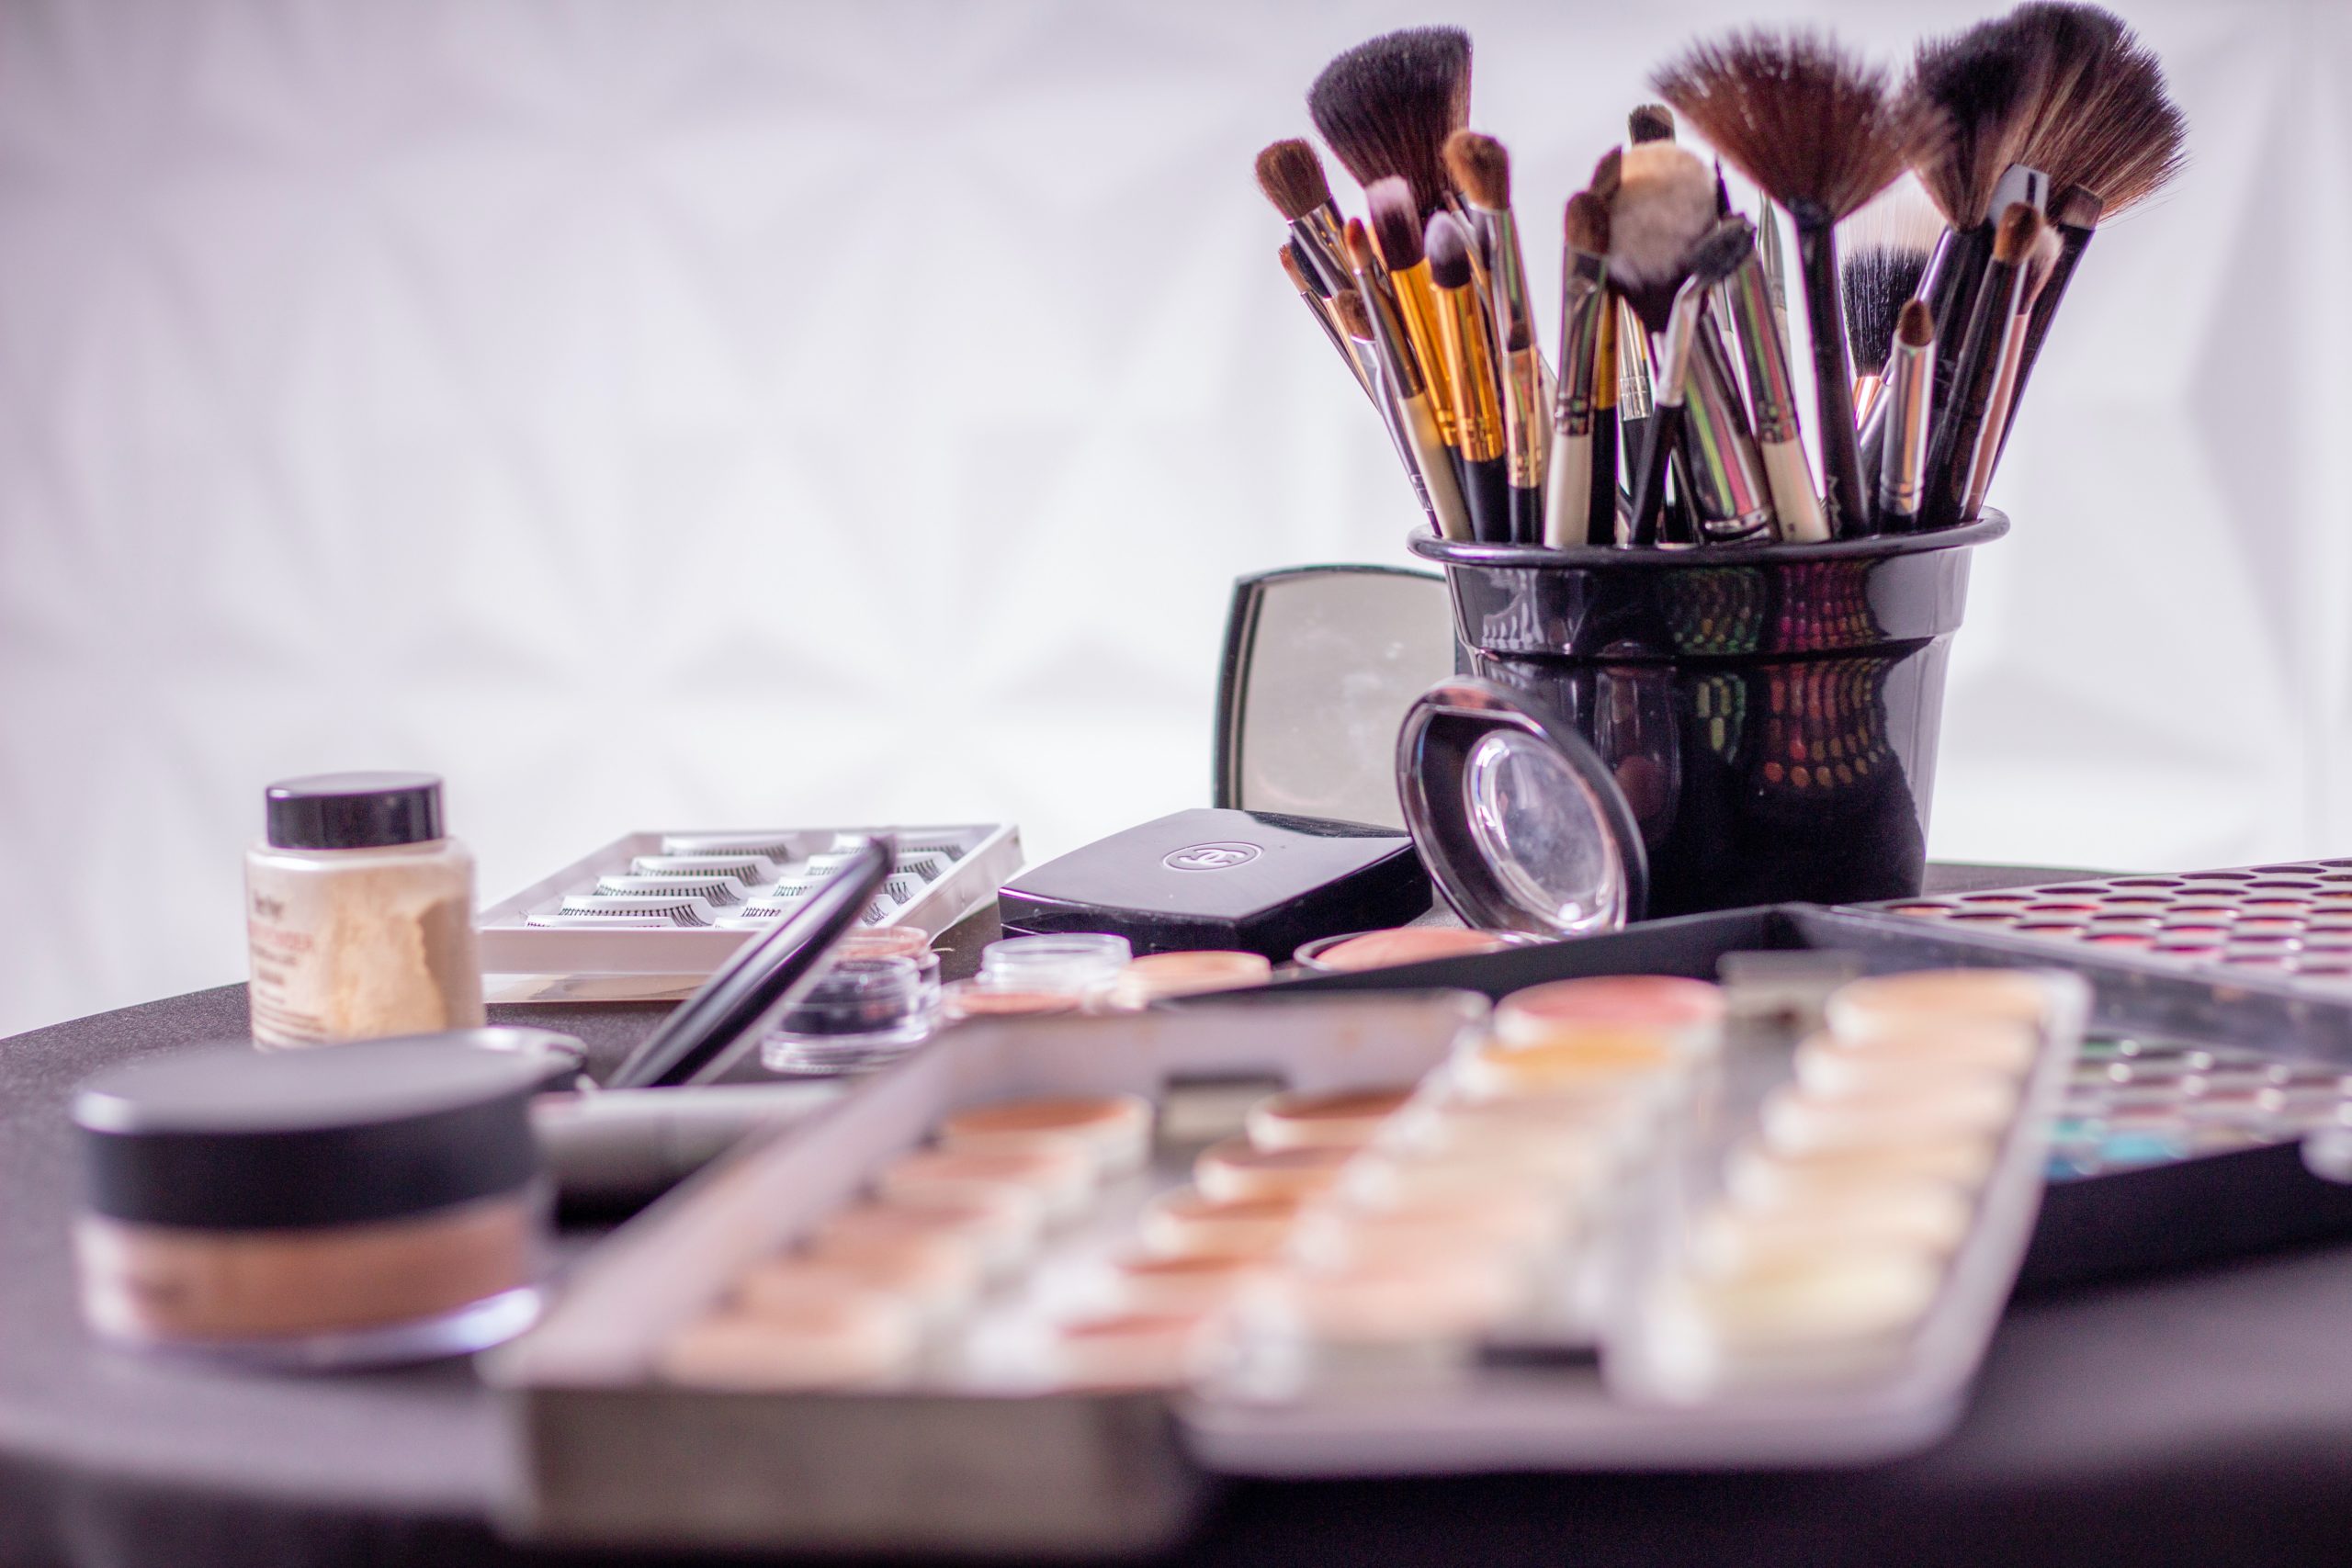 Cosmetics on a table, including eyeshadow palettes and brushes.